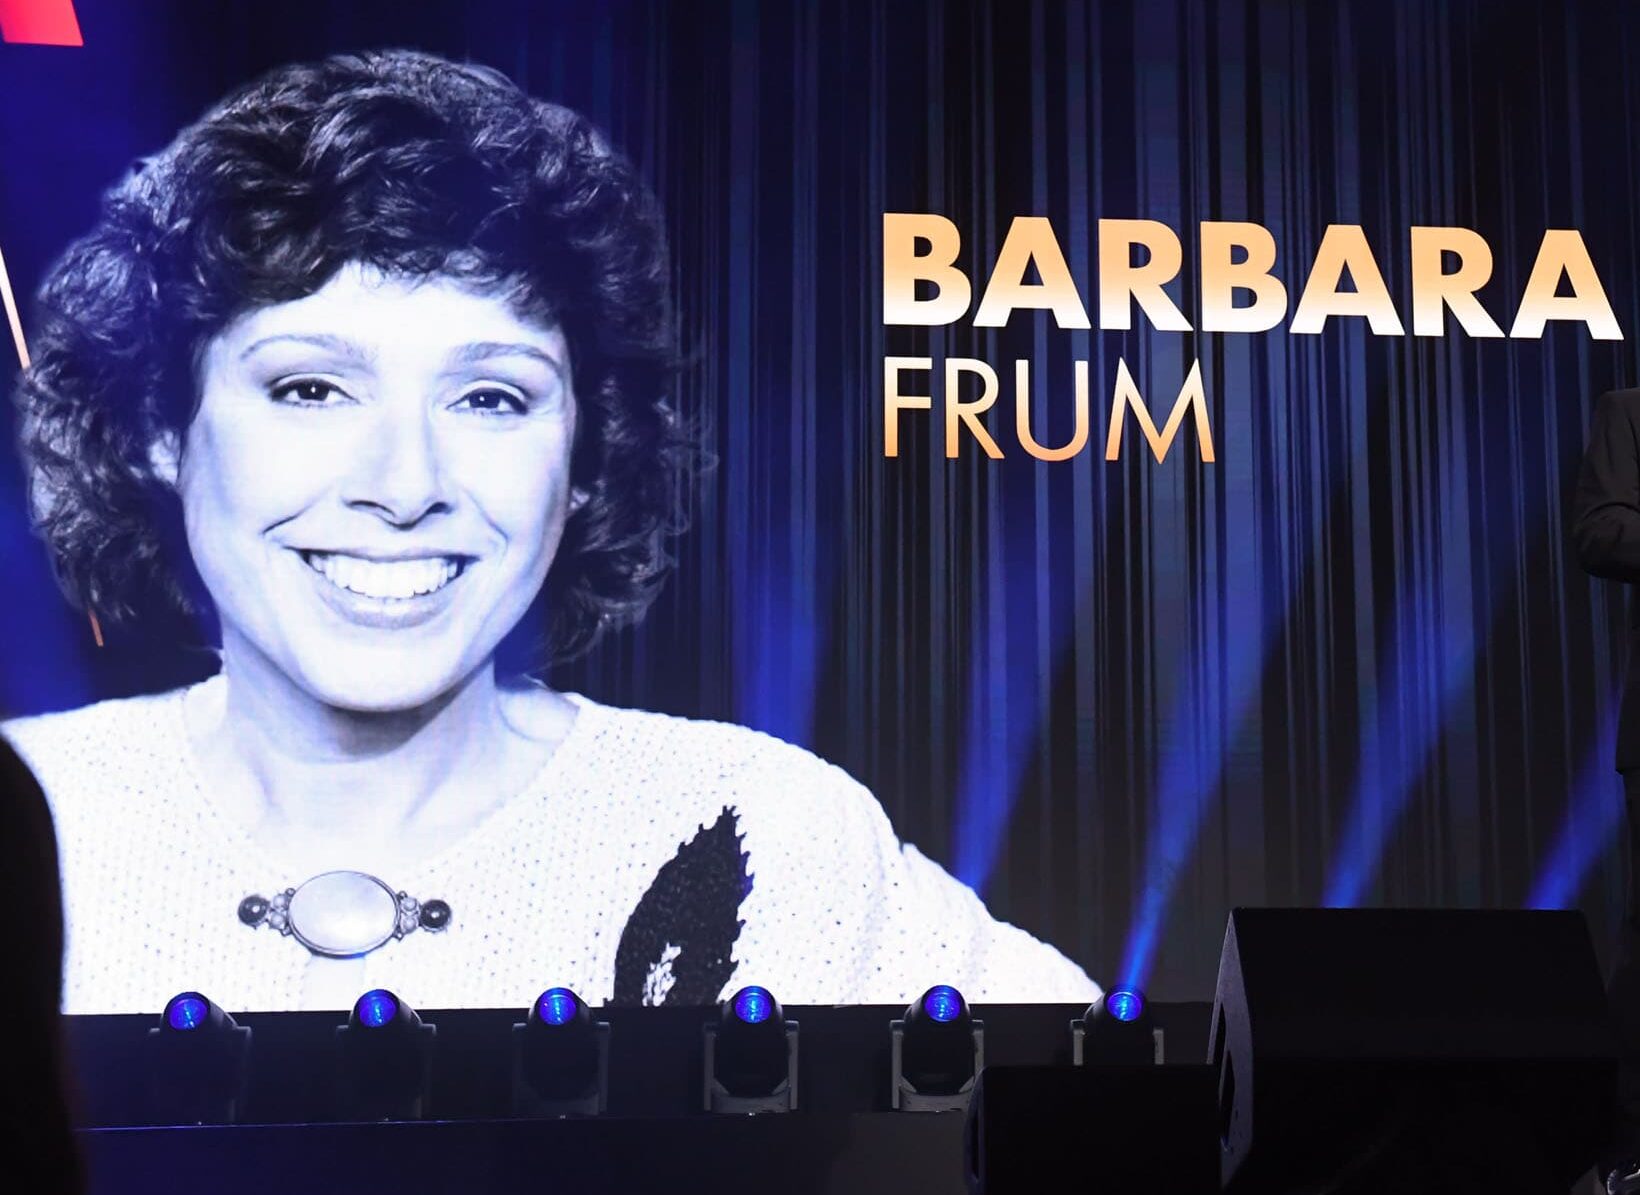 An image of Barbara Frum projected onto the stage